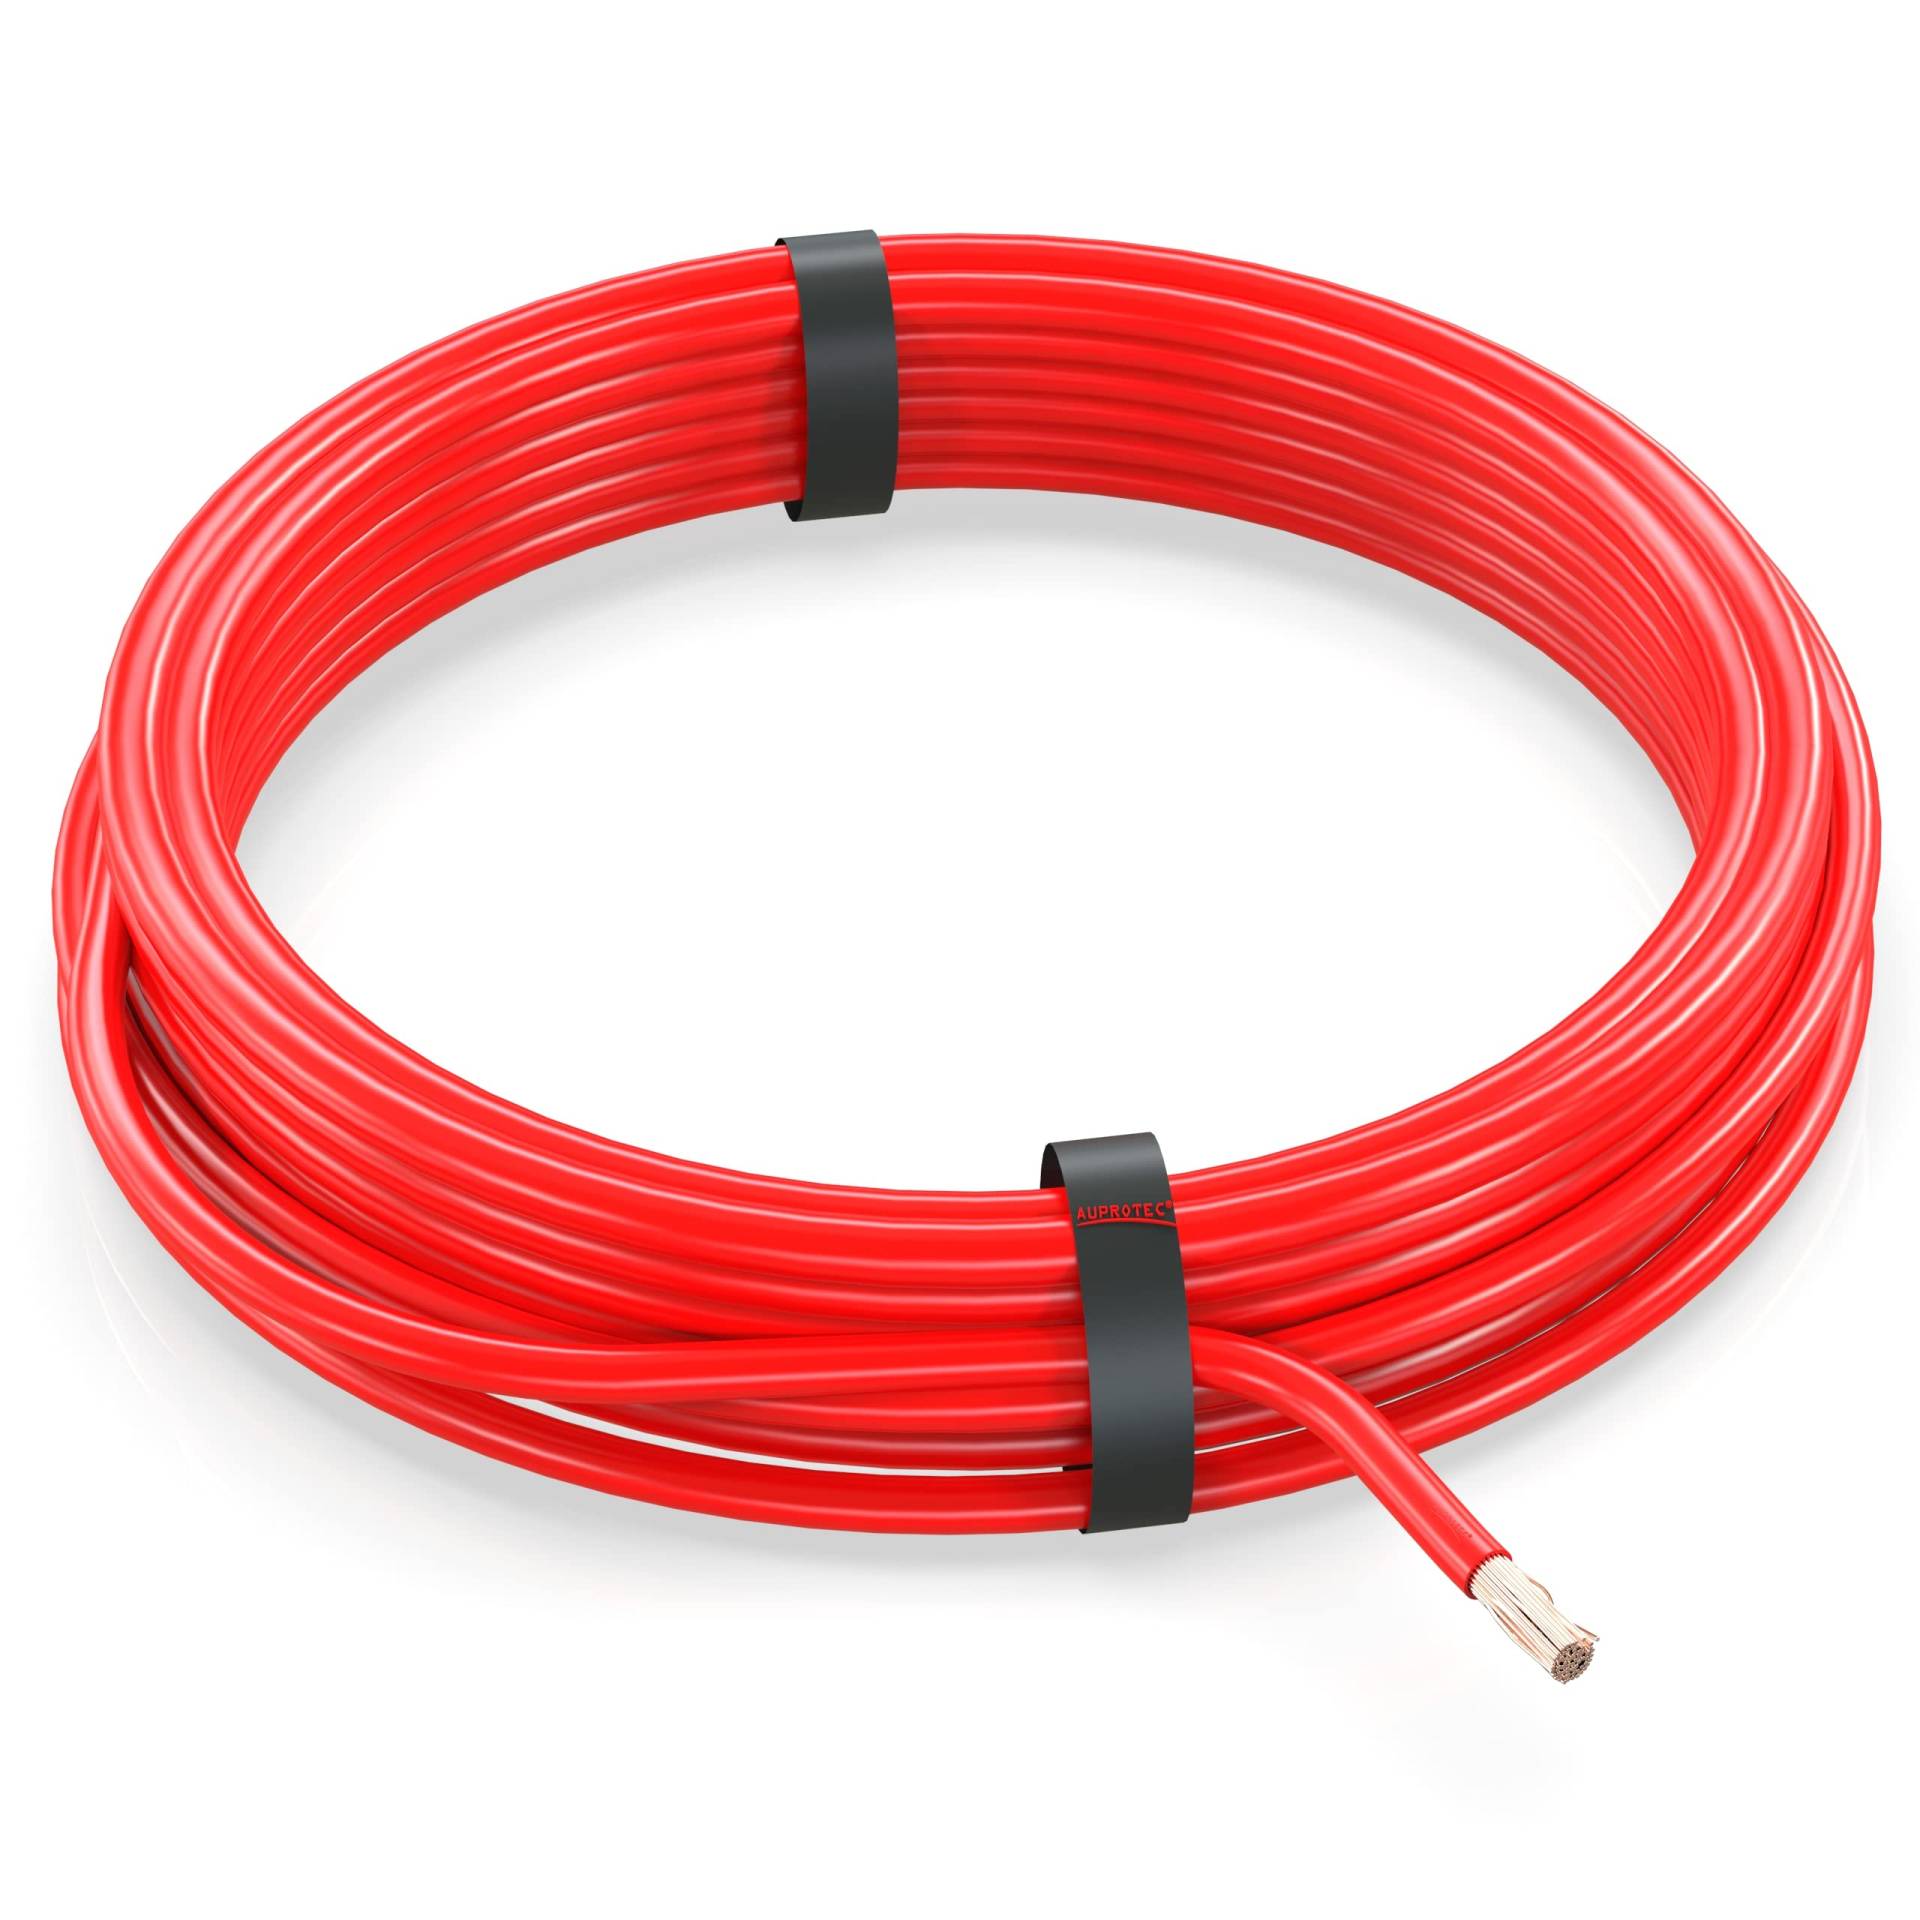 AUPROTEC 10m Fahrzeugleitung 6,0 mm² FLRY-B Auto Kabel als Ring Farbe rot von AUPROTEC